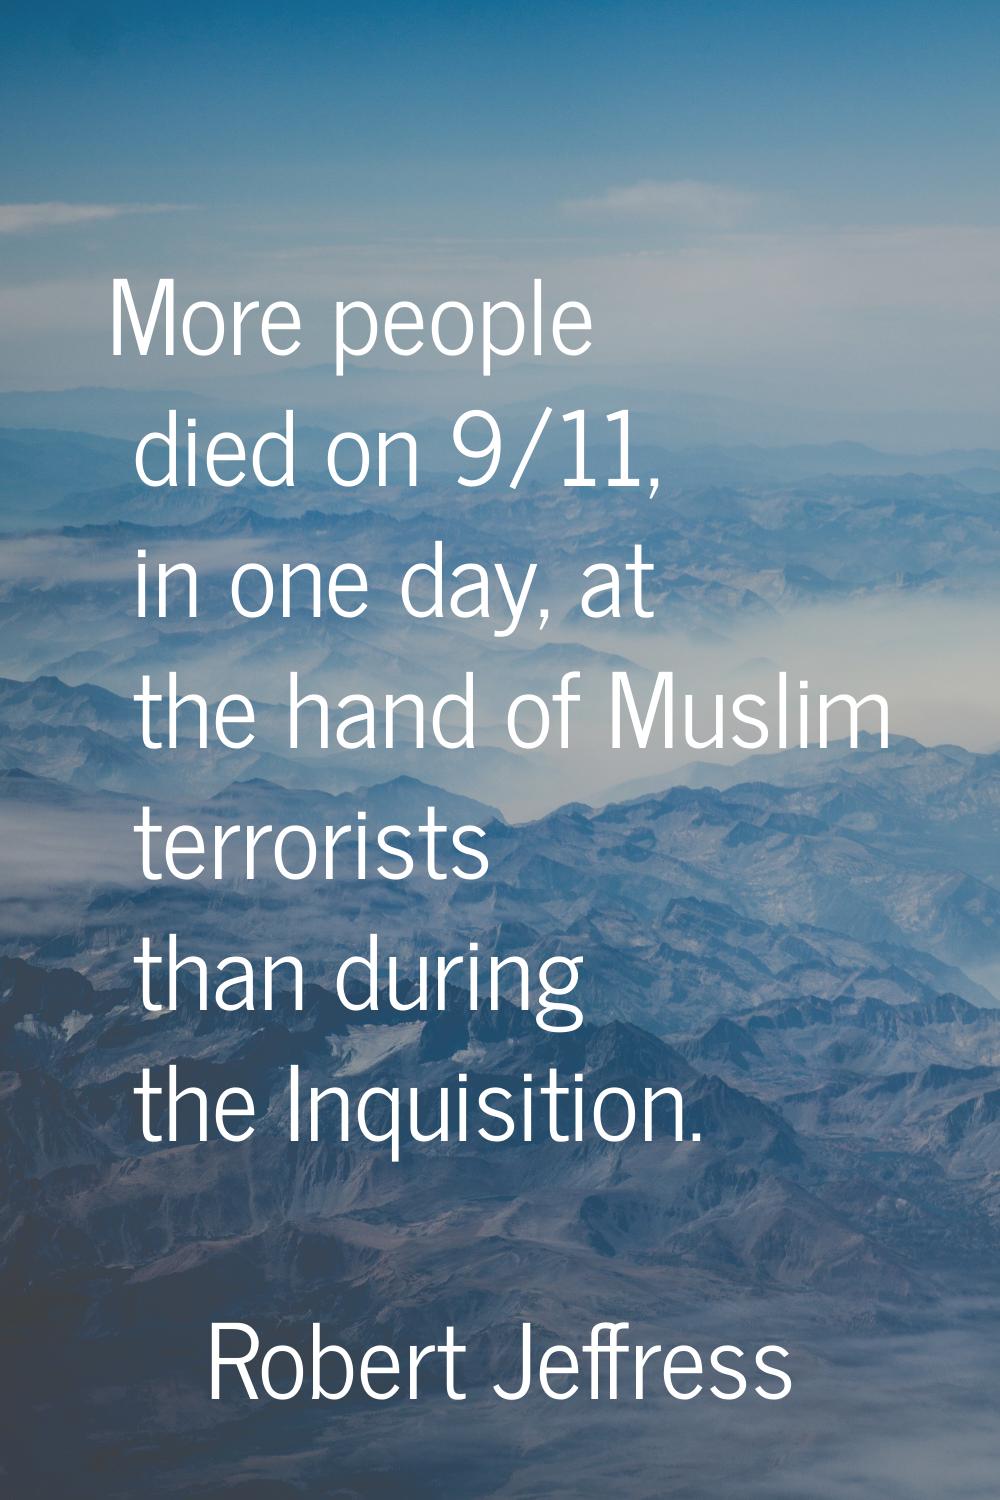 More people died on 9/11, in one day, at the hand of Muslim terrorists than during the Inquisition.